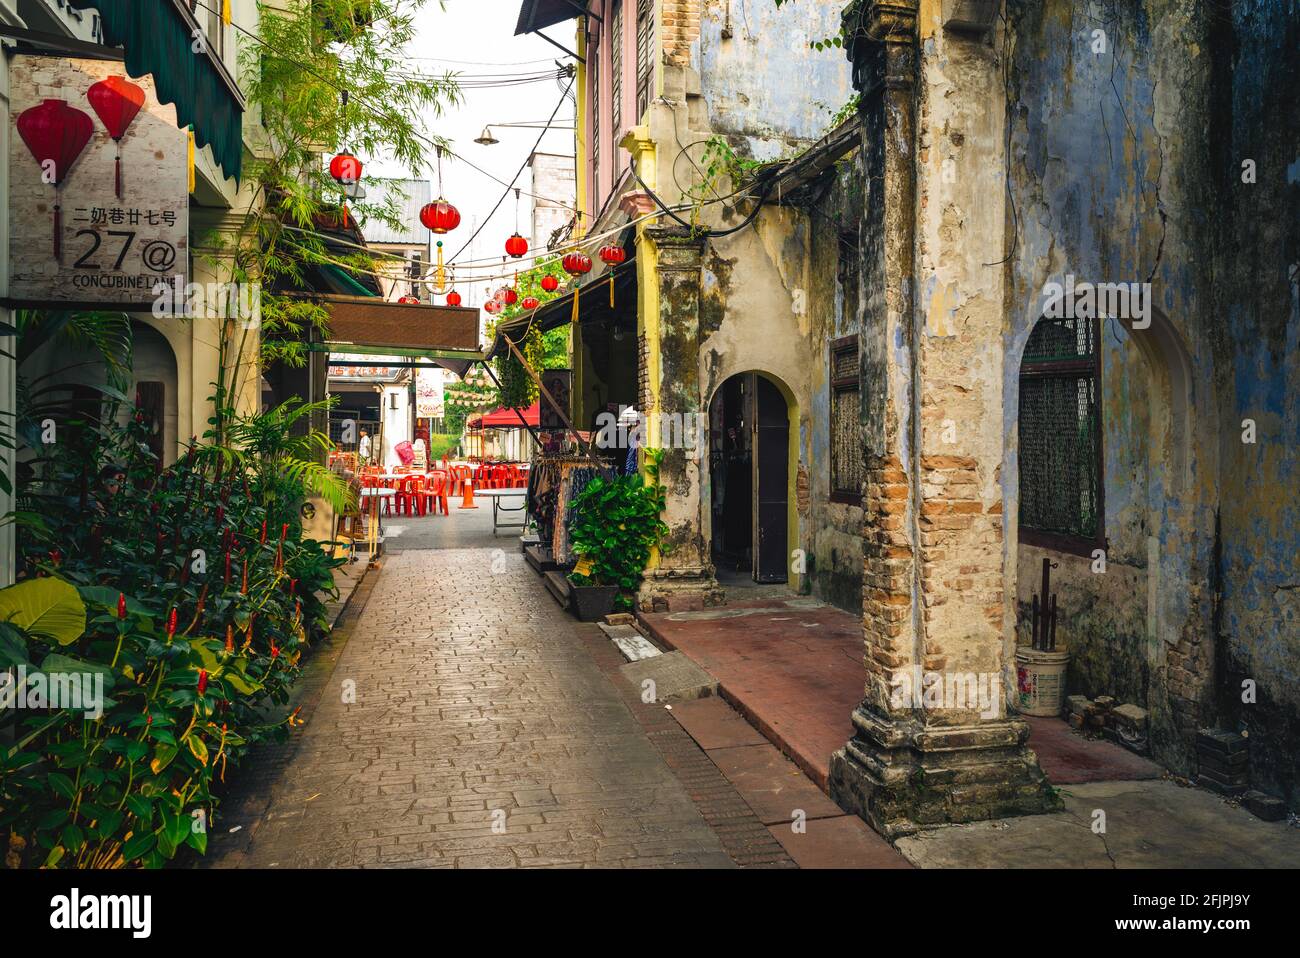 August 15, 2018: Second Concubine Lane, or Yi Lai Hong, is a narrow and small lane located at Leech Street in Old Town of Ipoh, Malaysia. It built by Stock Photo